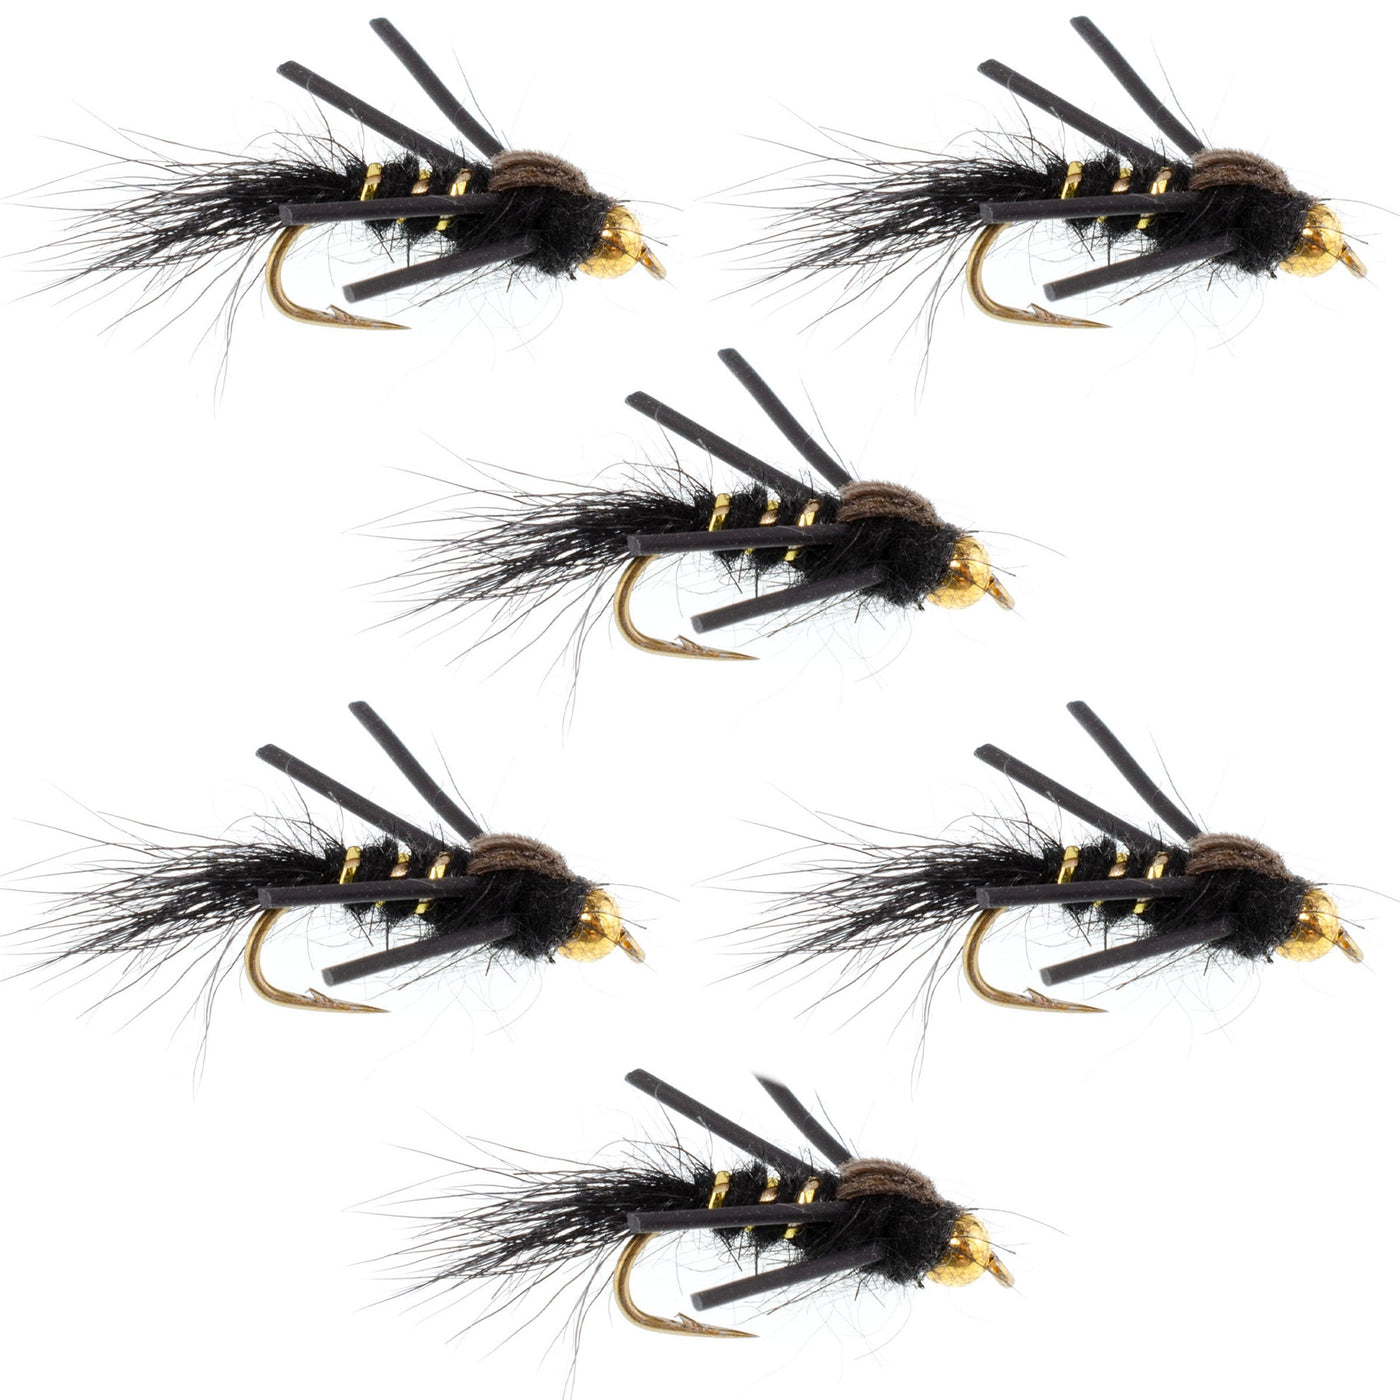 Tungsten Bead Head Rubber Legs Black Gold-Ribbed Hare's Ear Trout Fly Nymph - 6 Flies Hook Size 12